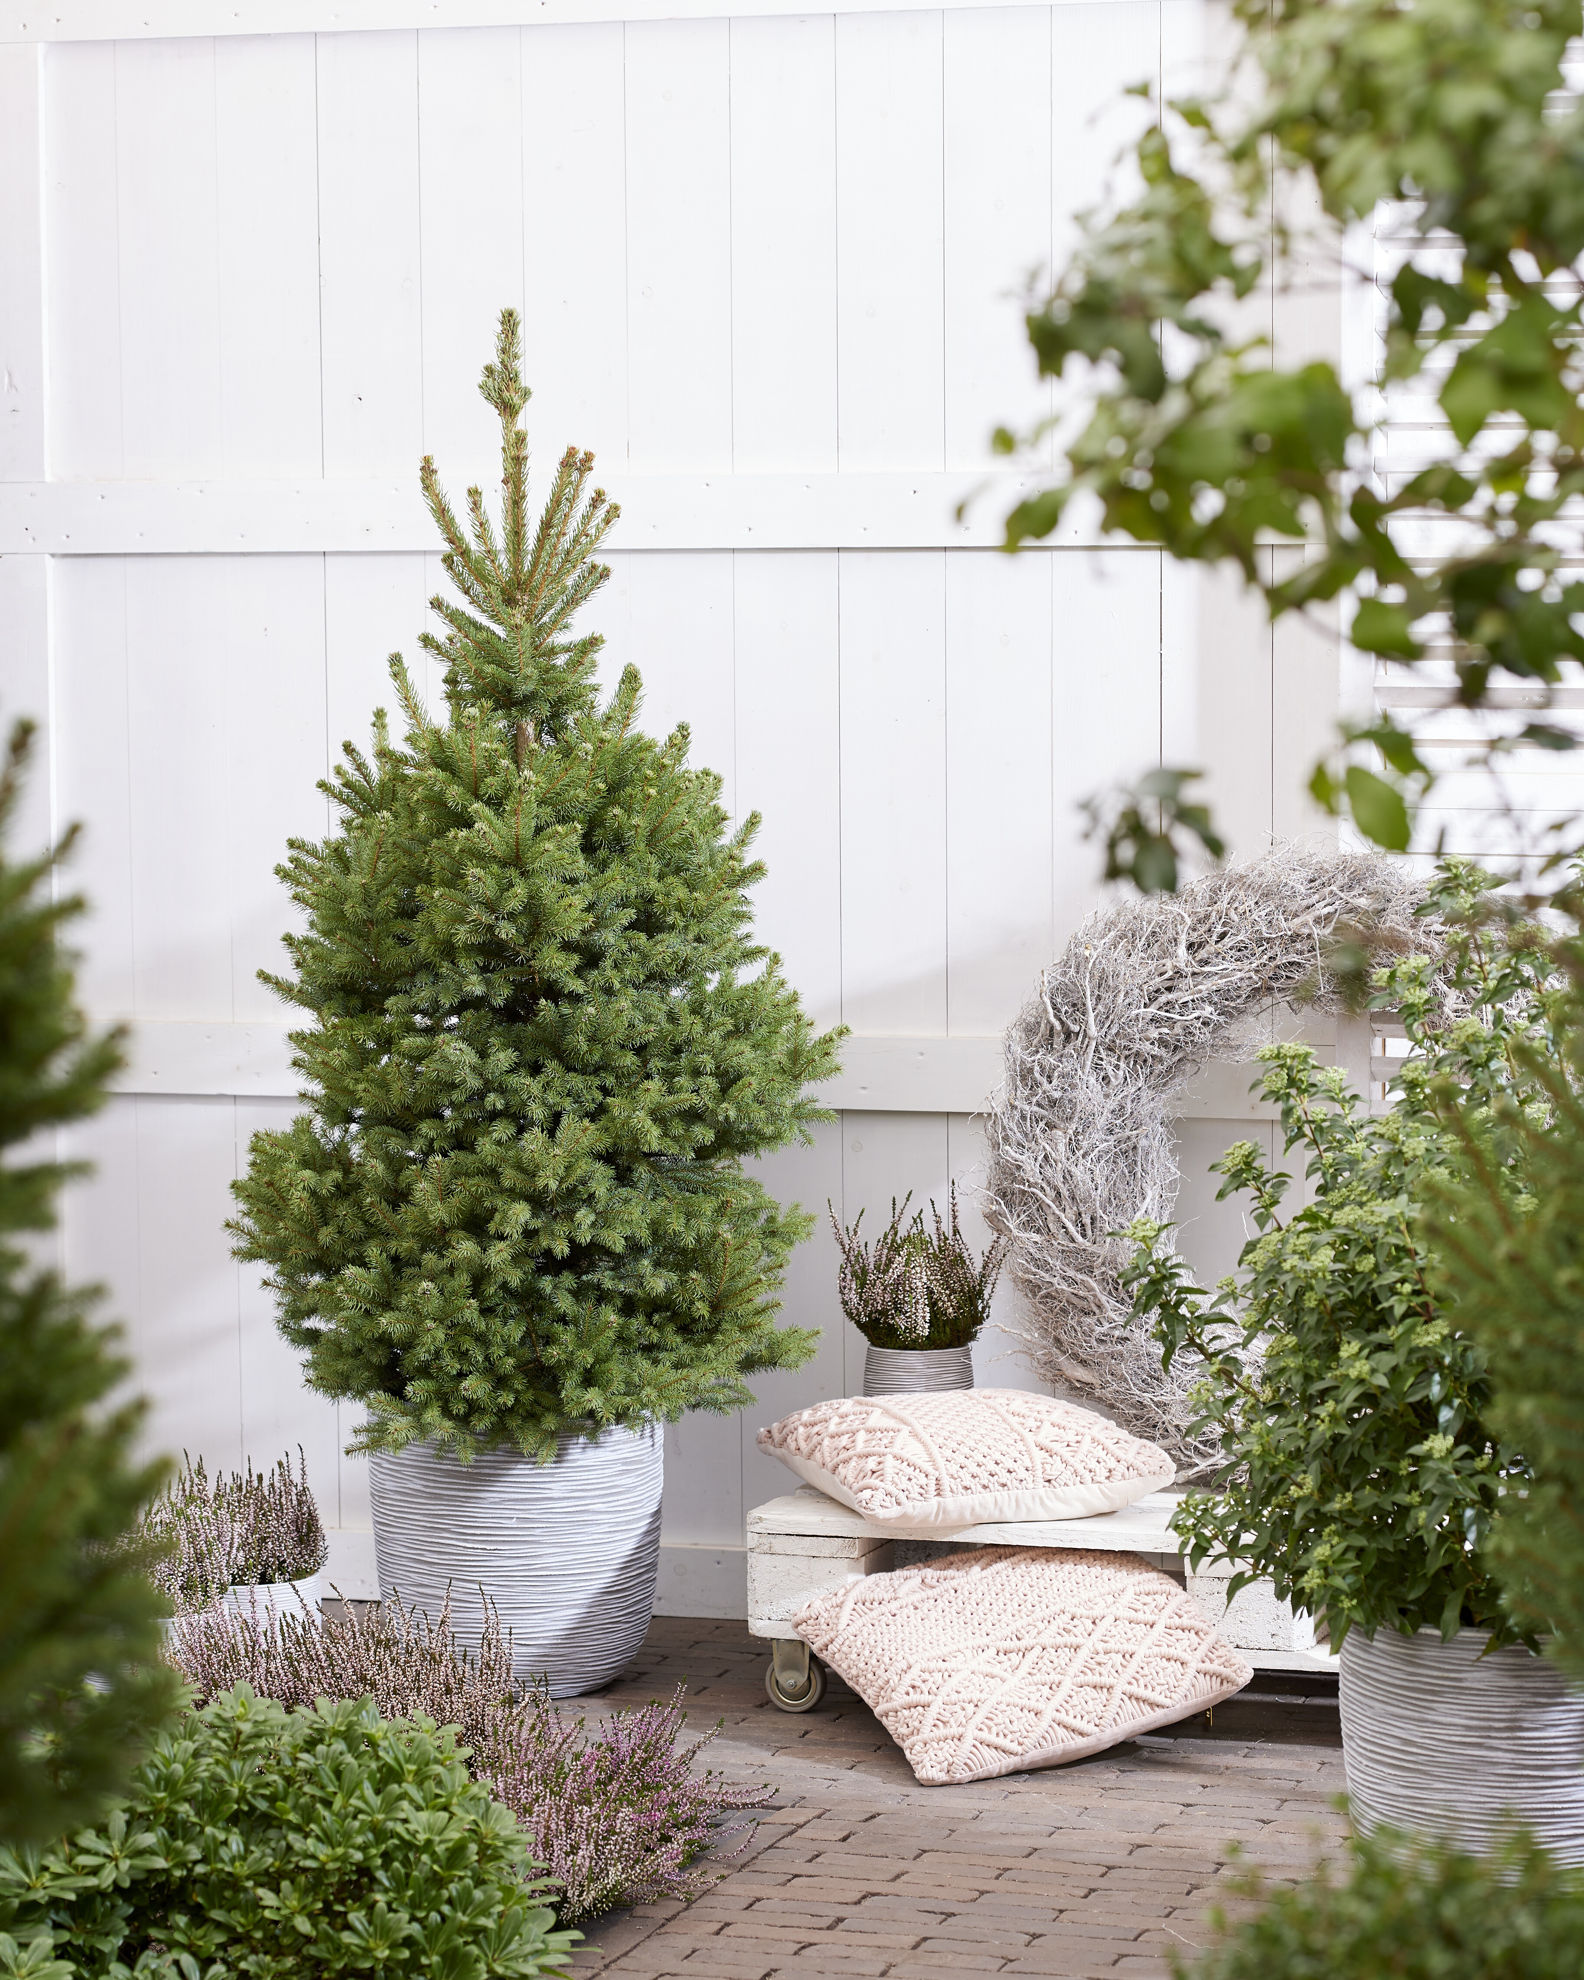 https://www.breederplants.nl/images/thumbs/0002176_picea.jpeg